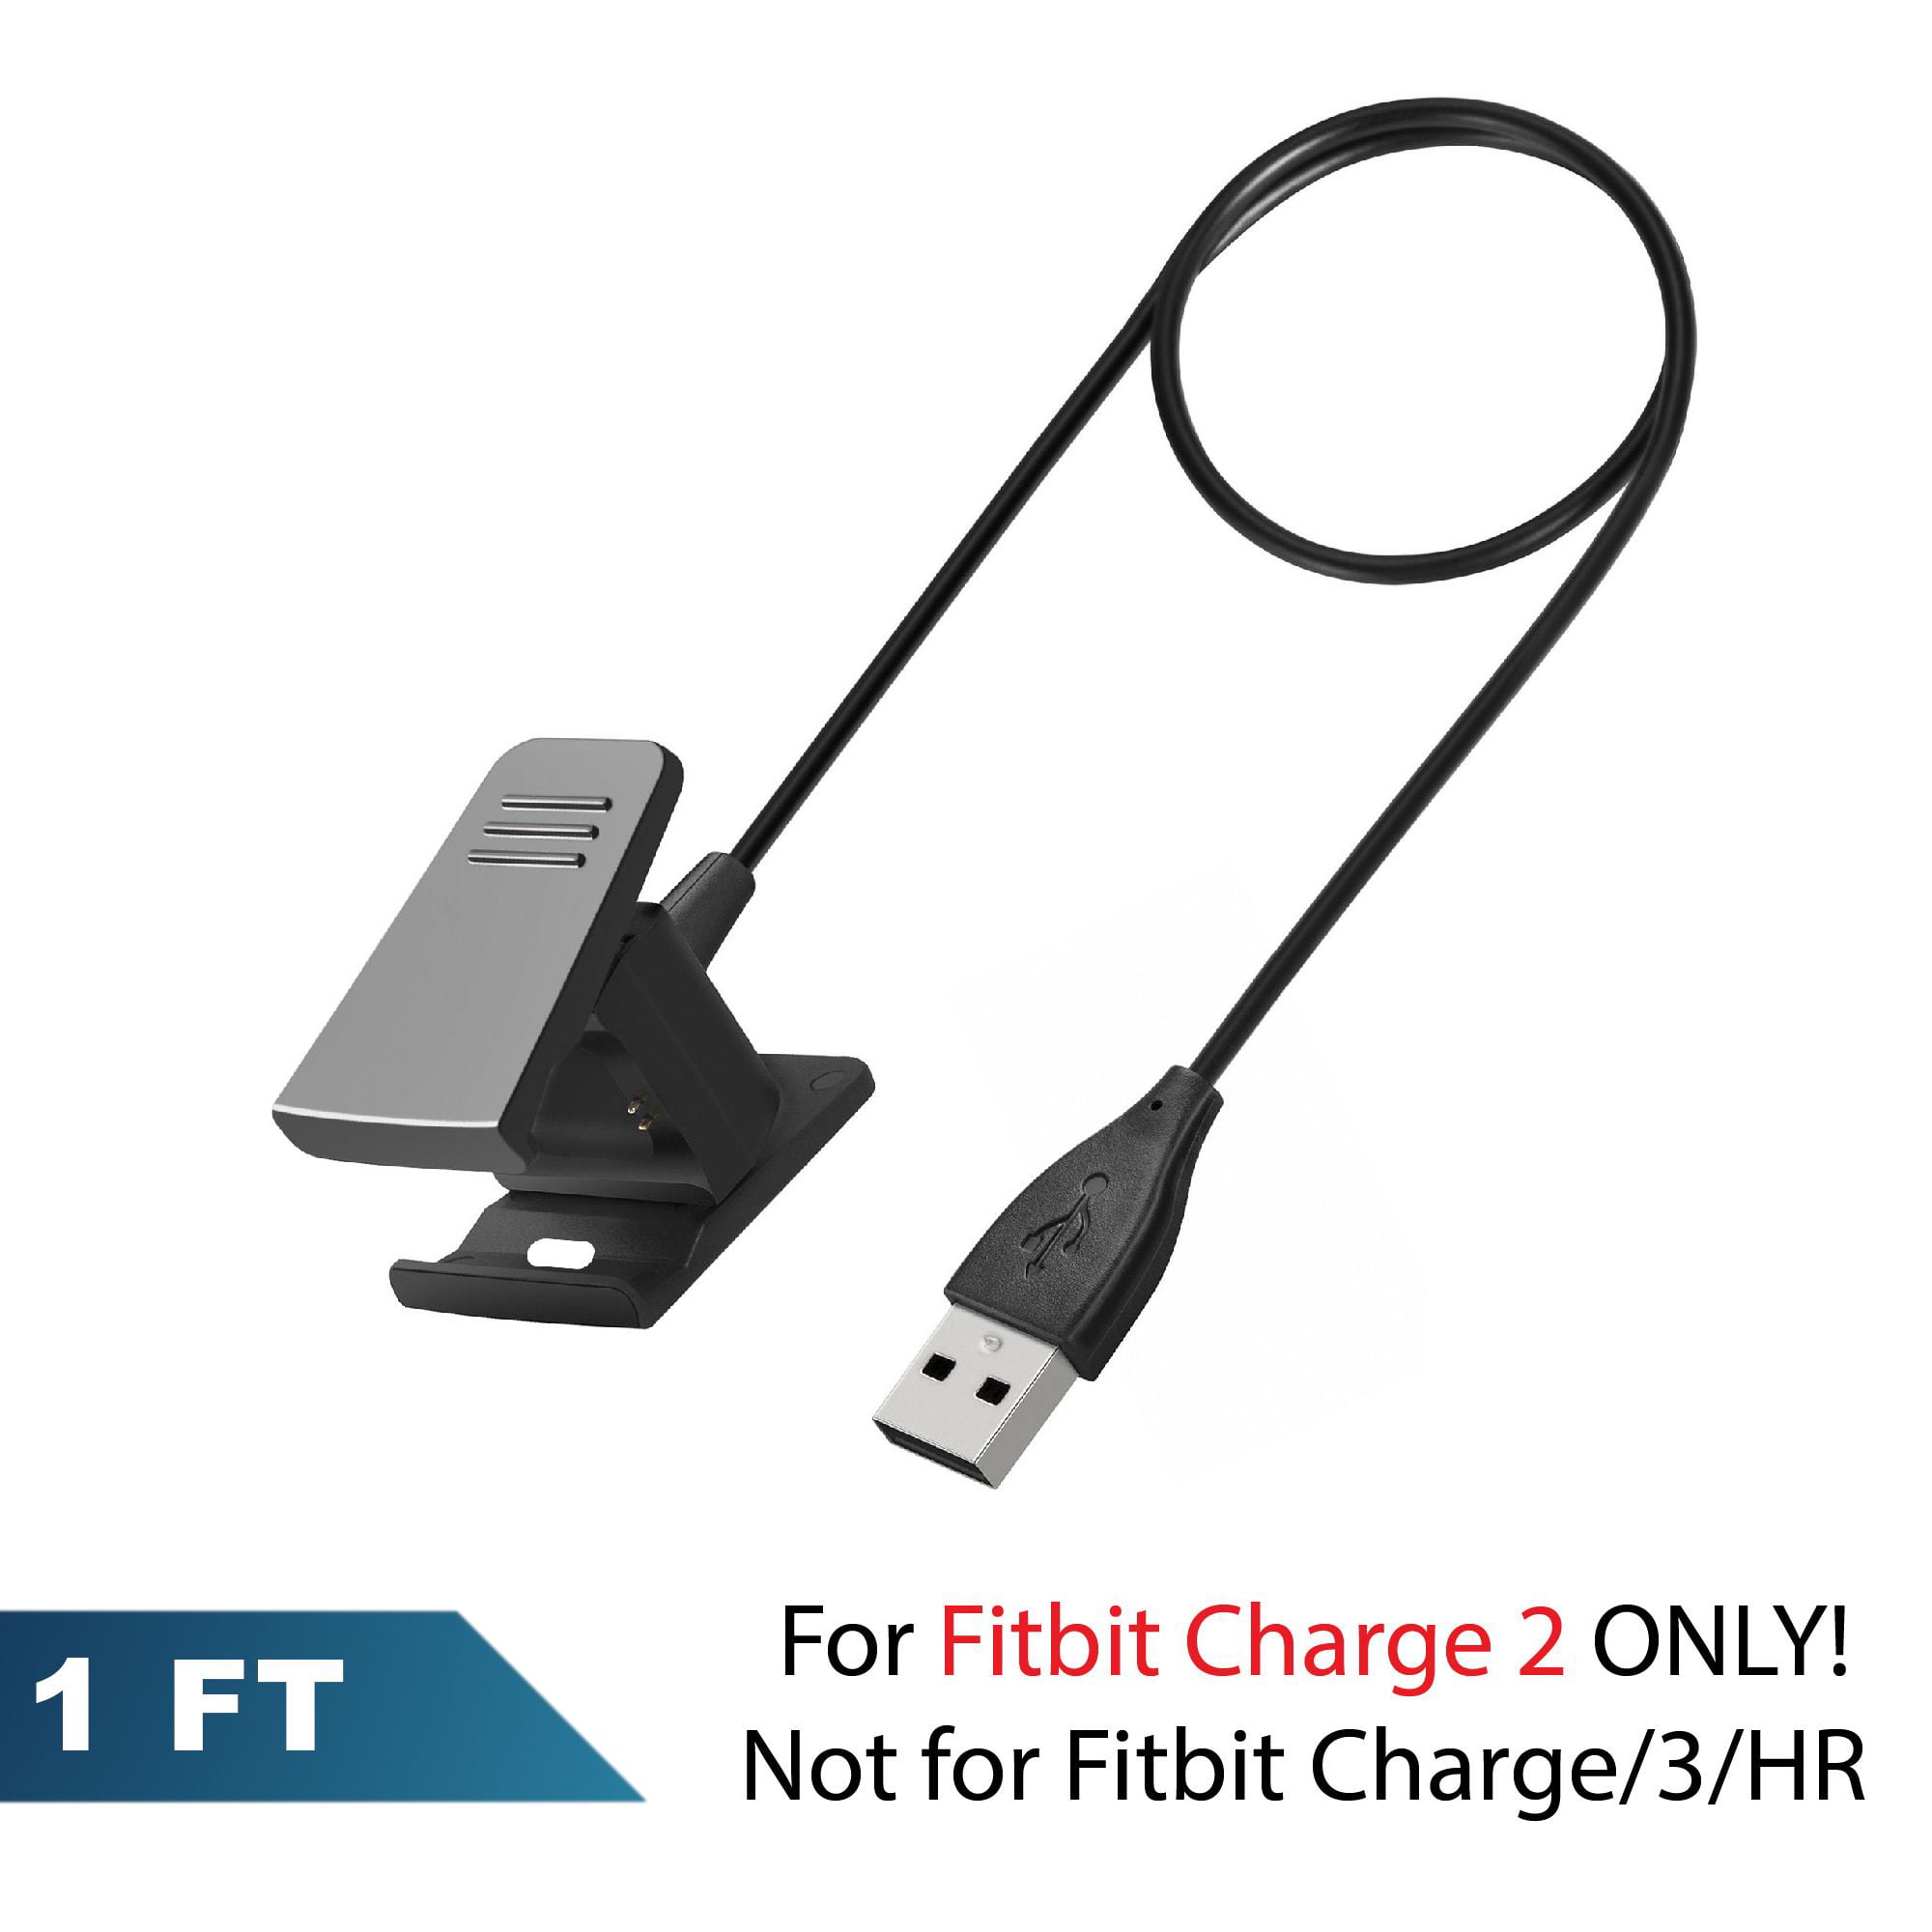 21 Inch Replacement USB Charging Cables for sale online Fitbit Charge 2 HR Charger